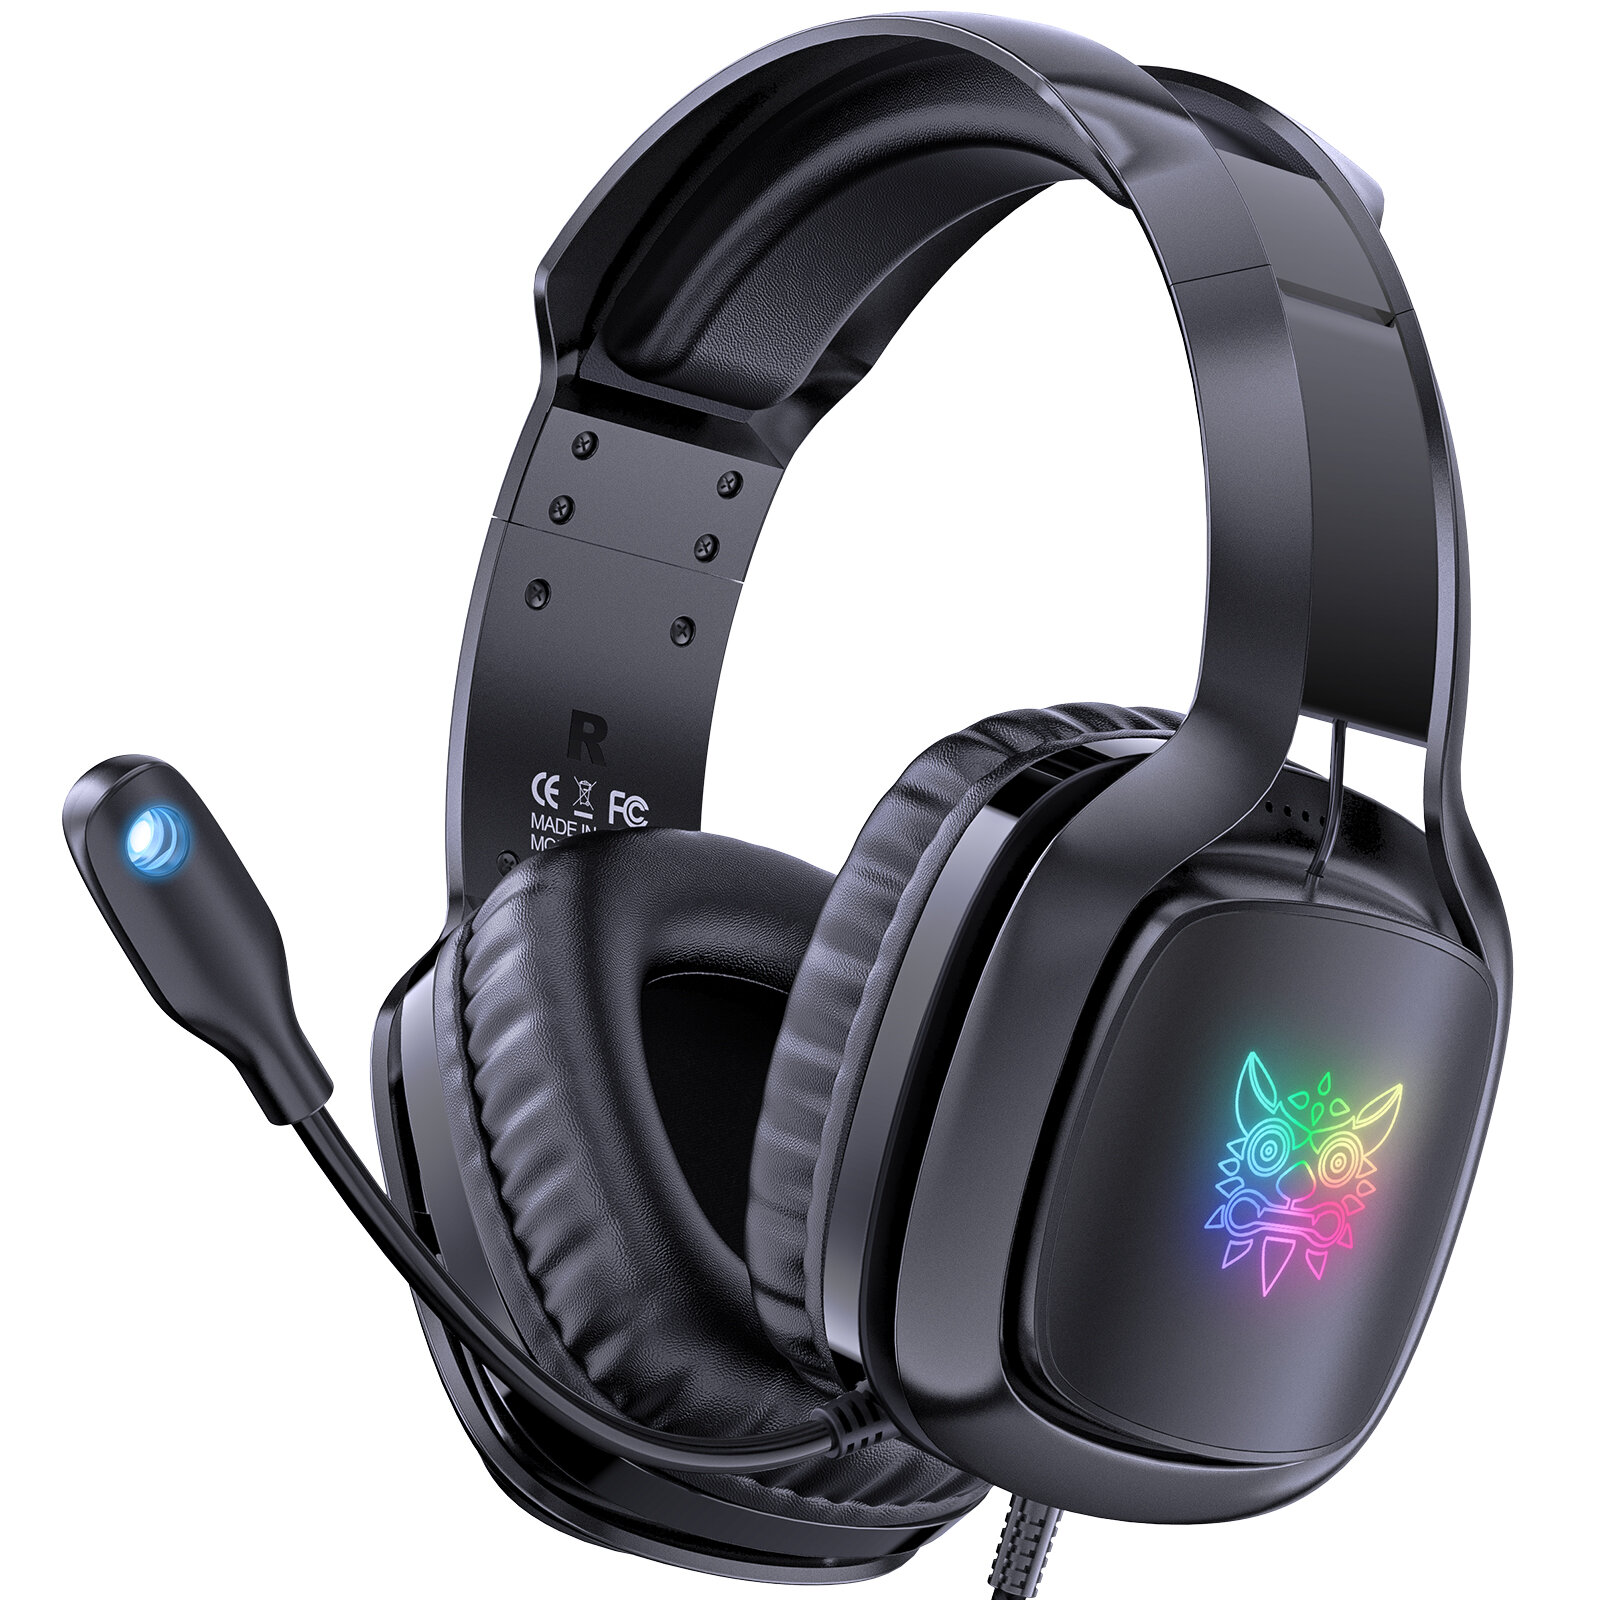 Image of ONIKUMA X21 RGB Gaming Headset GB Light Stereo Noise Canceling Headphones with Mic Audio Adapter